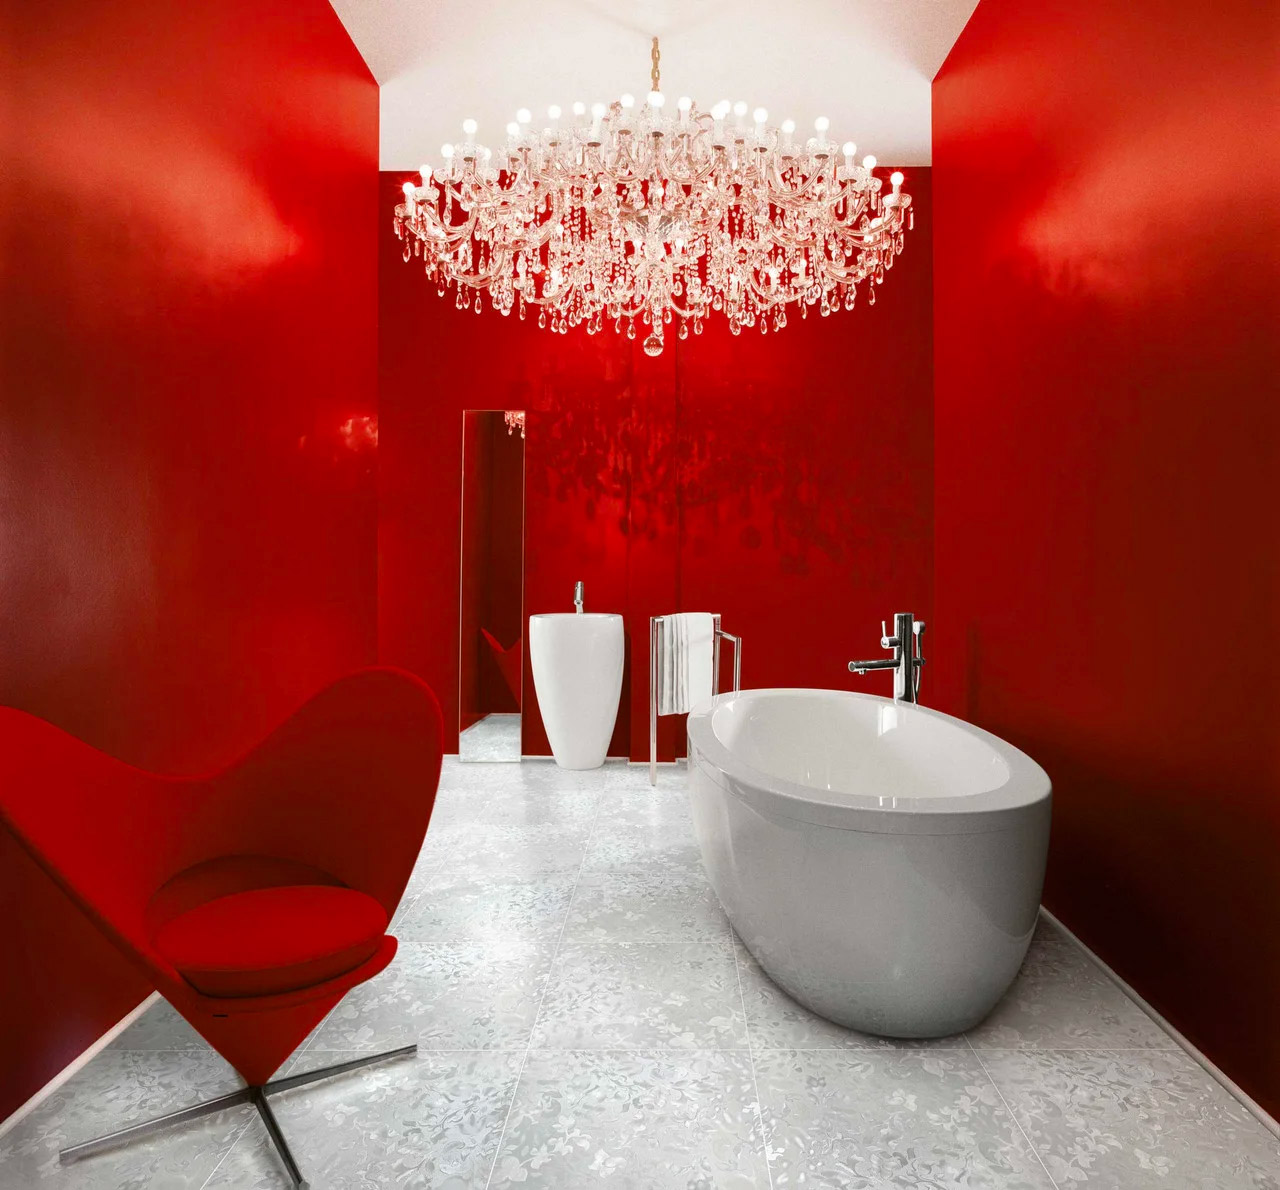 red-and-white-bathroom-600x558.jpg